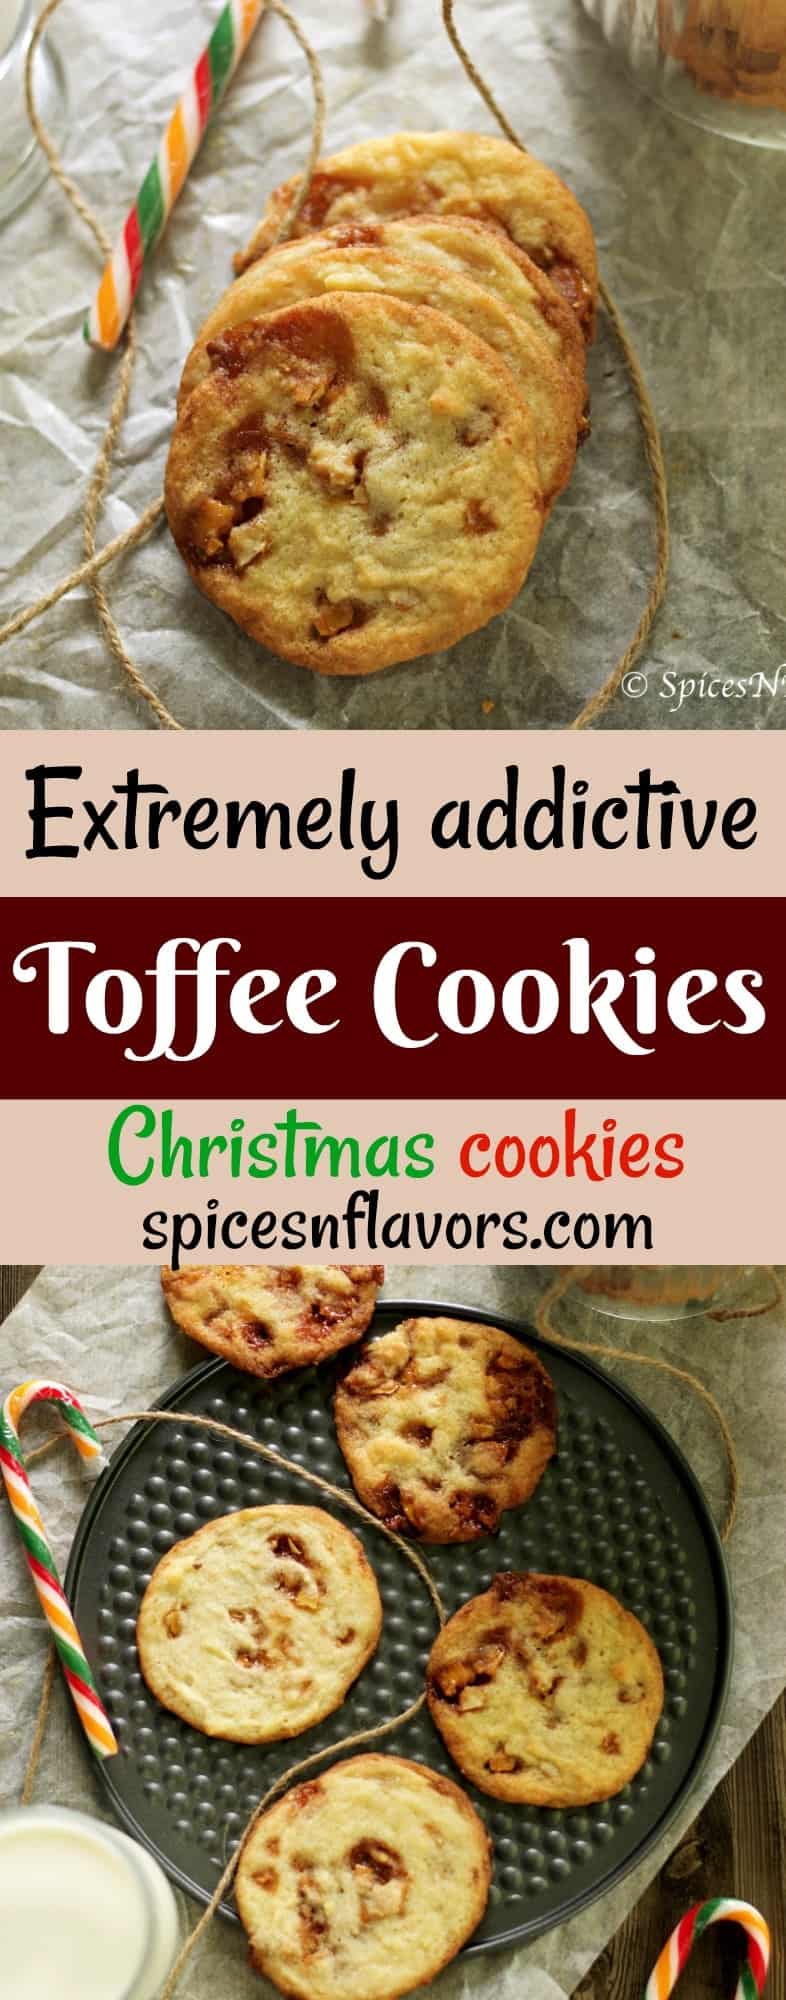 pin image of toffee cookies